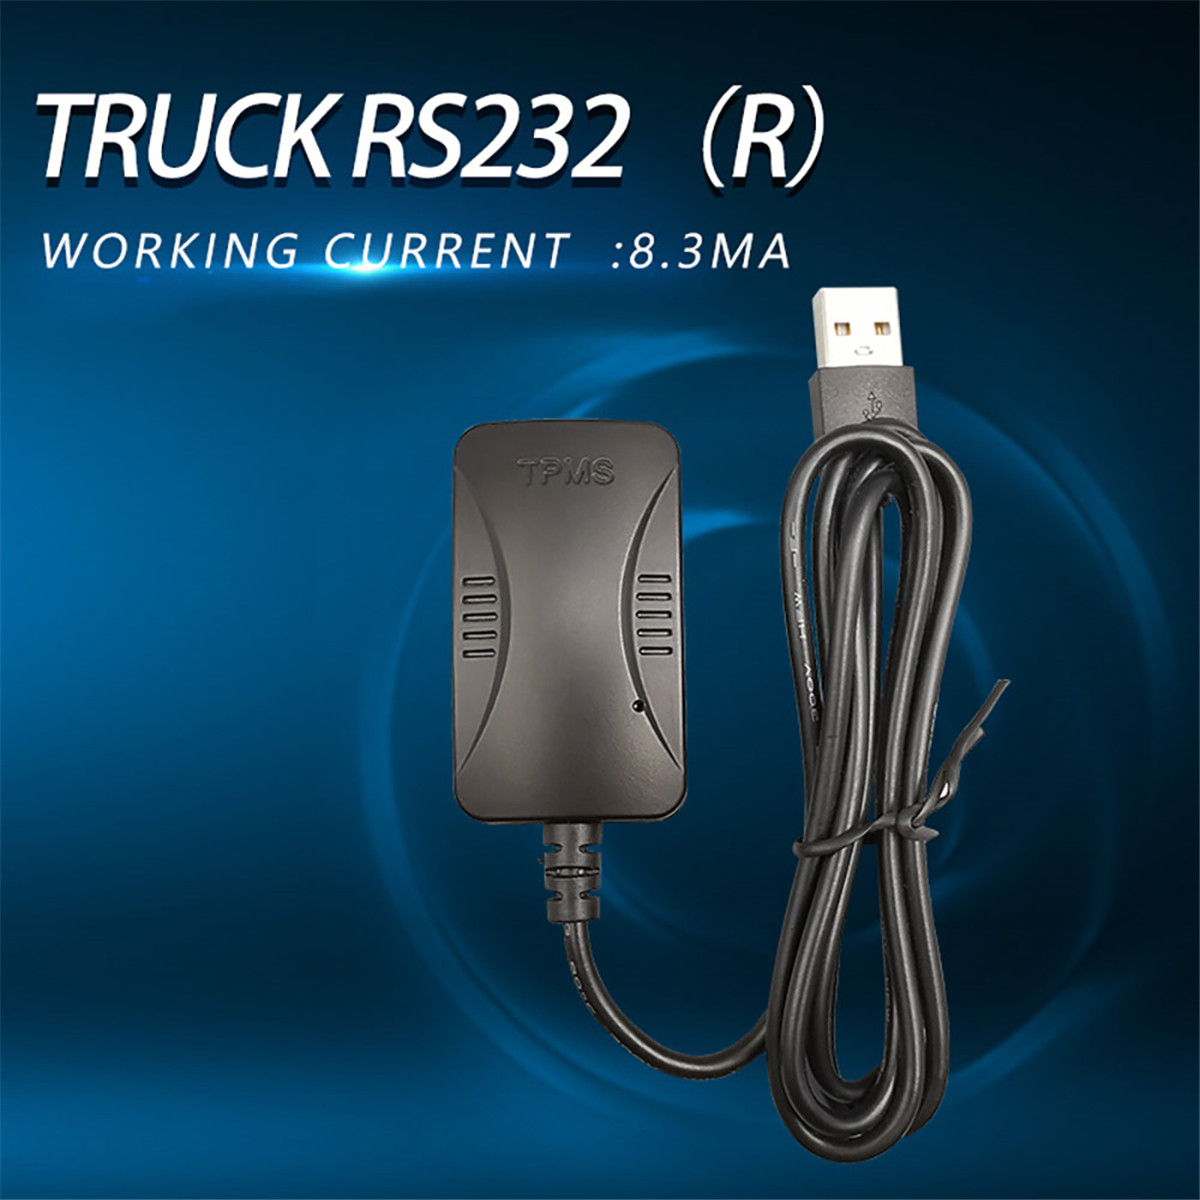 Truck RS23201 (10)